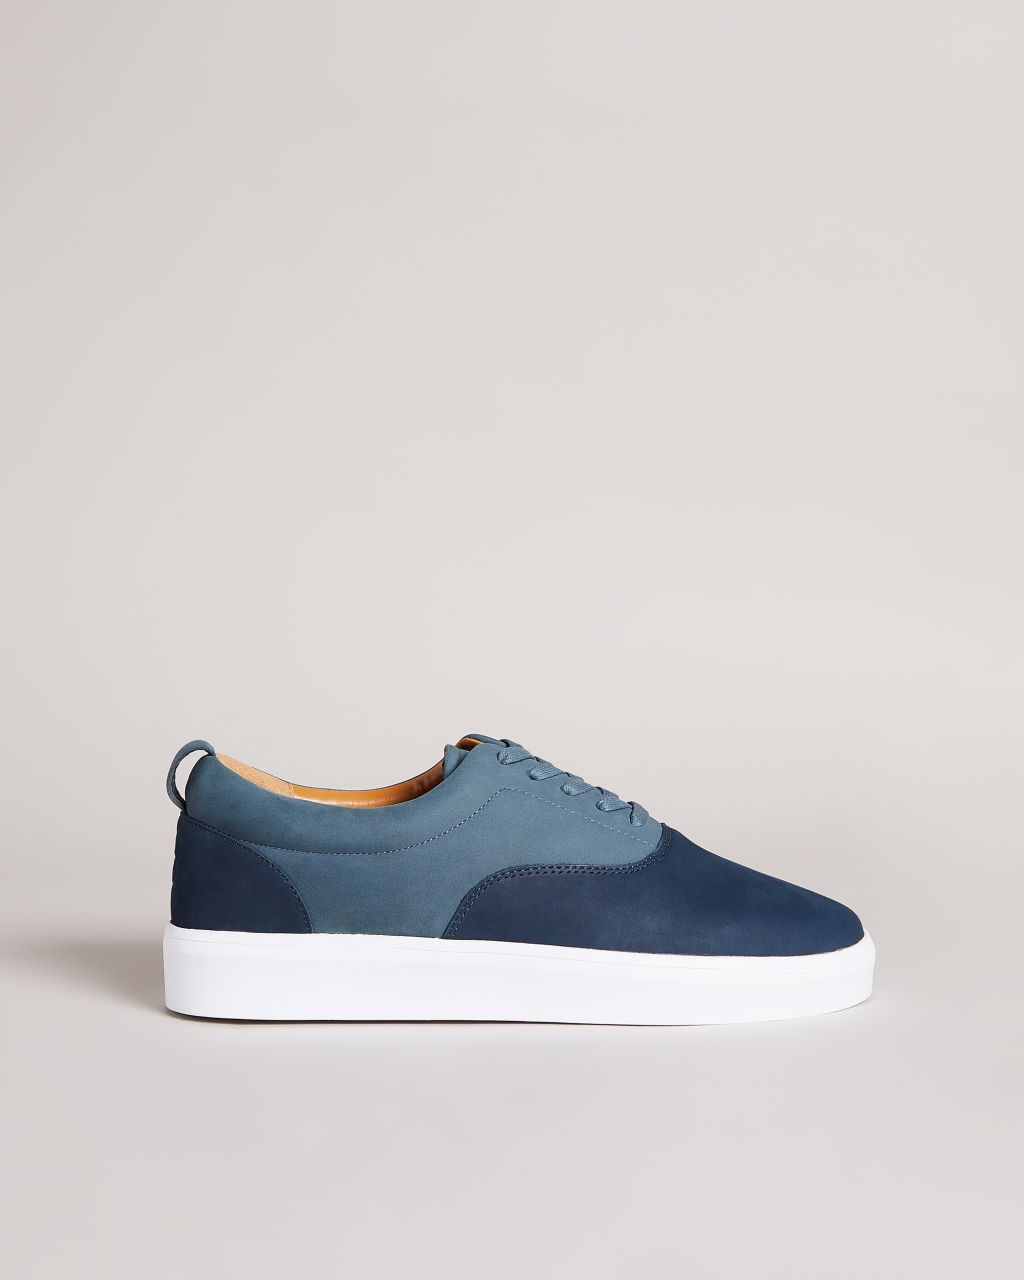 Ted Baker Men's Nubuck Casual Trainers in Blue, Shaunn